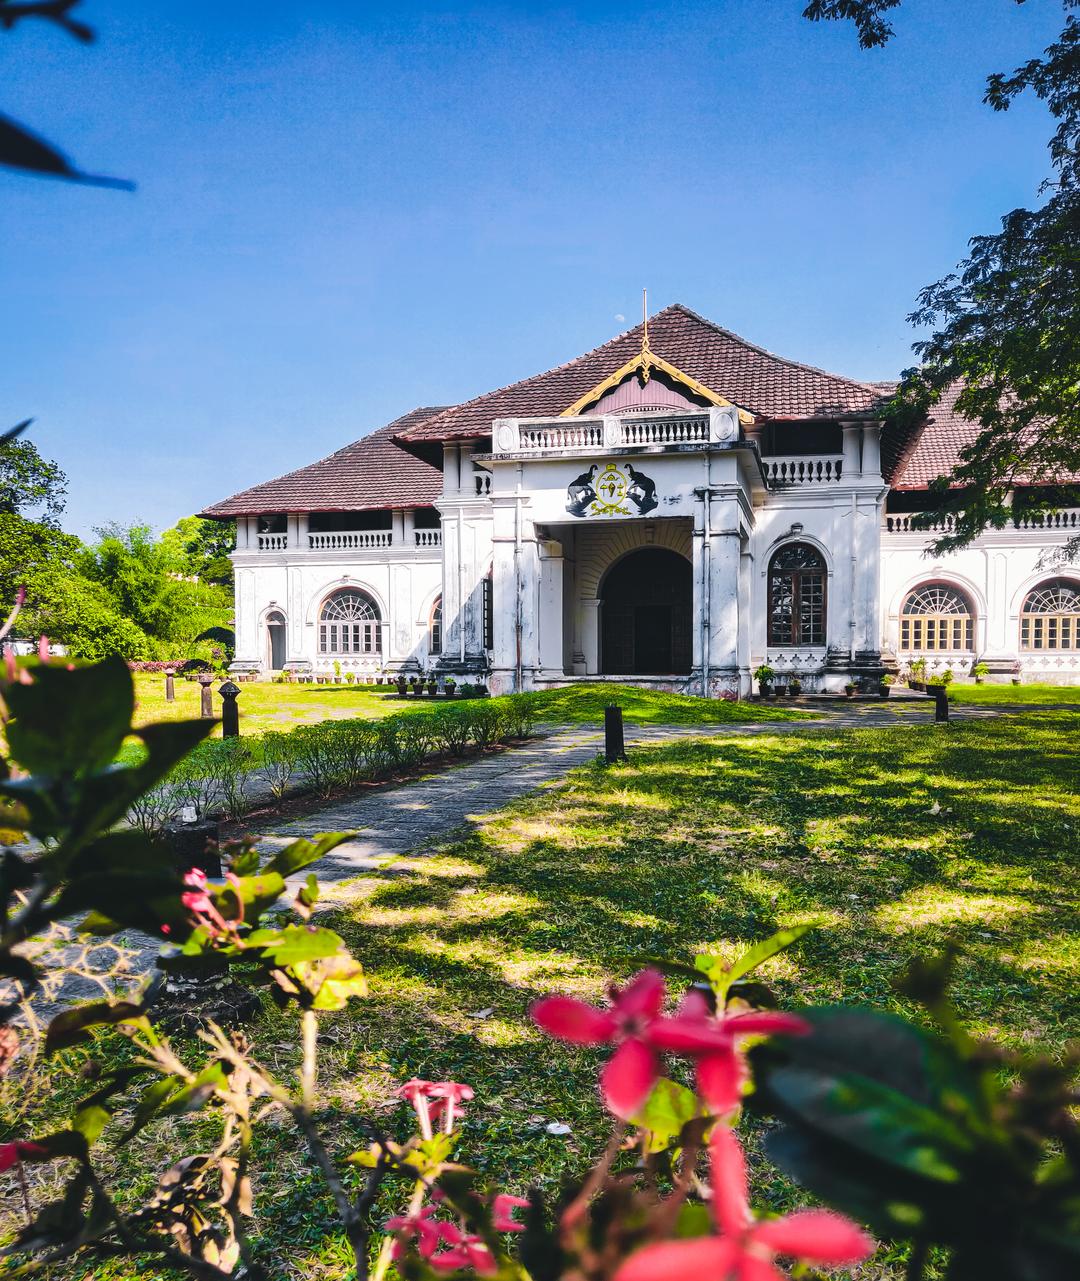 Archaeological Museum in Thrissur